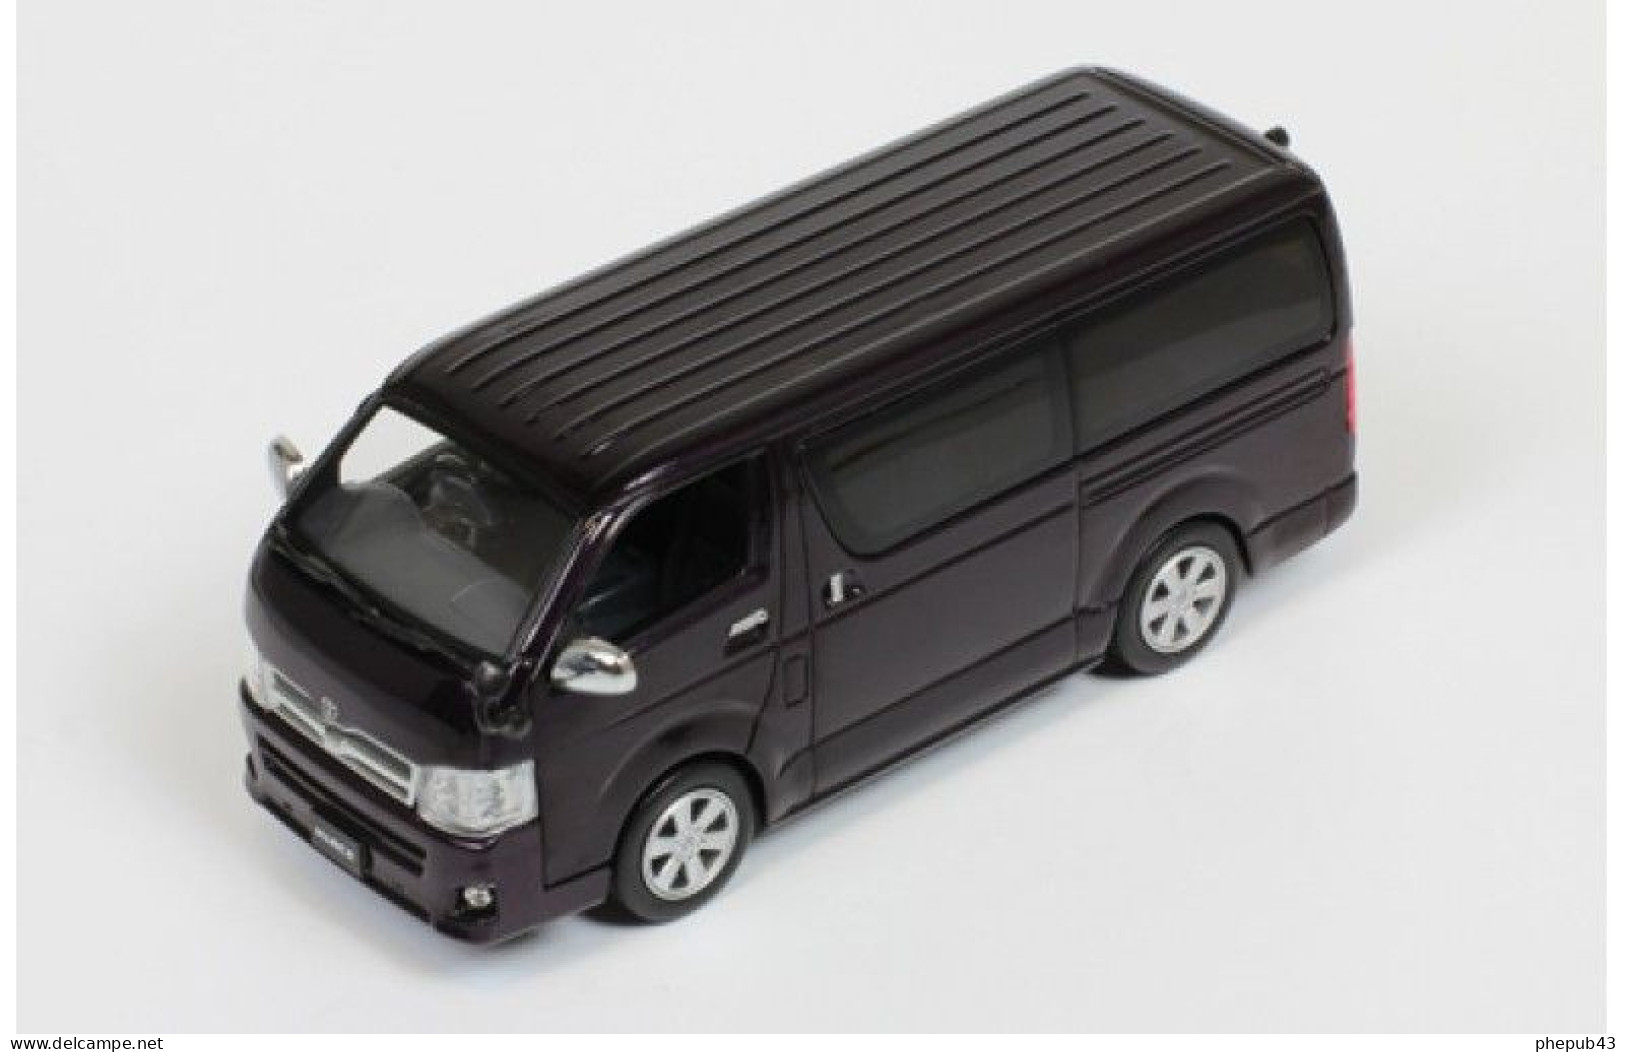 Toyota Hiace Super GL - 2012 - Prime Selection - Black - Righthand Drive - J-Collection - Ixo